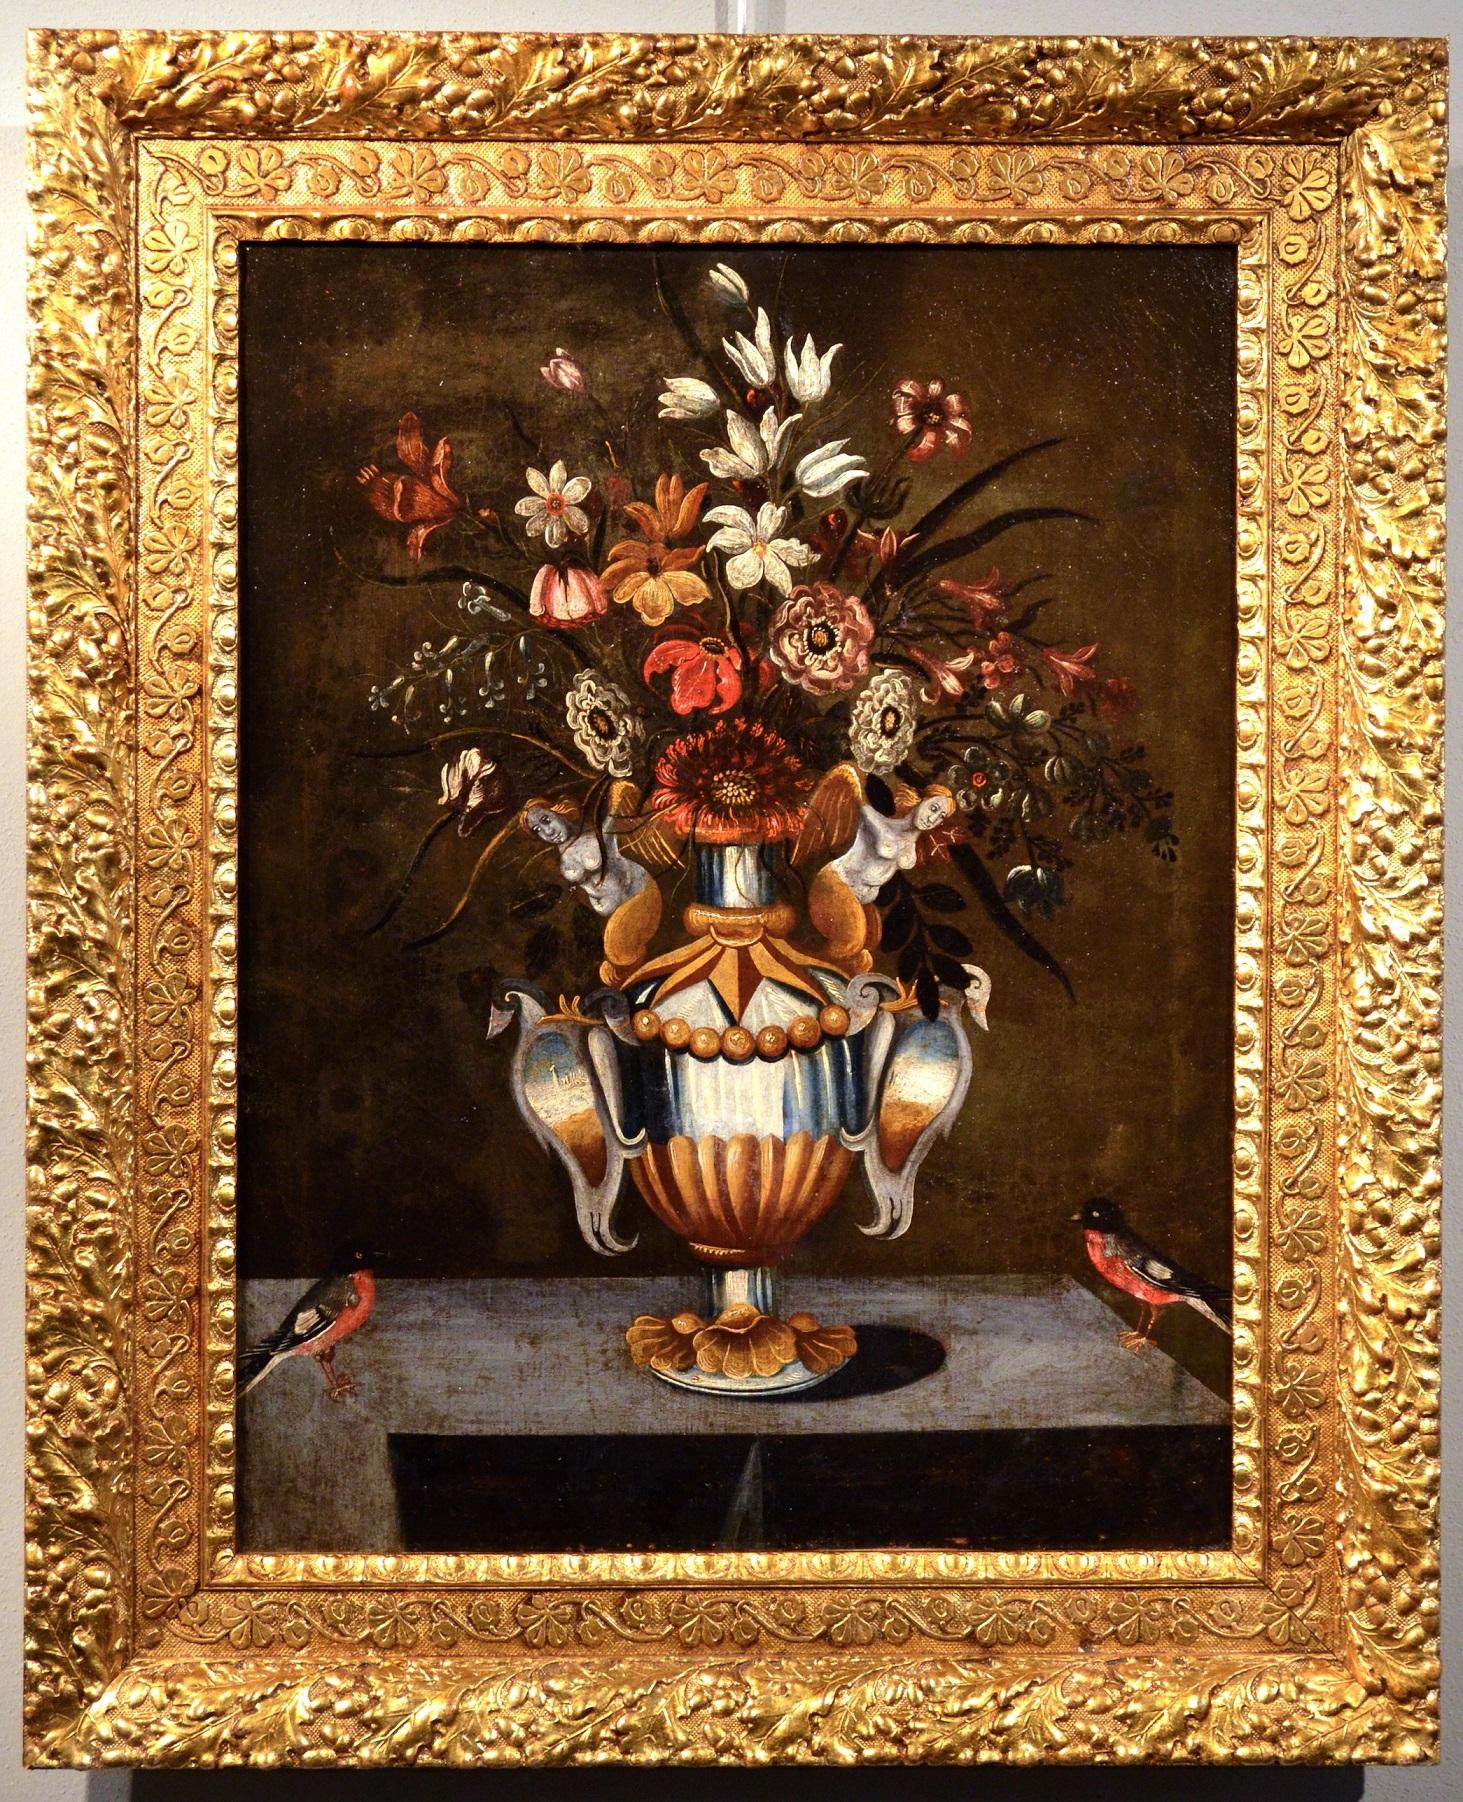 Still-Life Painting Master of the Grotesque Vase (active in Rome and Naples in the first quarter of the 17th century) - Peinture à l'huile sur toile Vieux maître 17ème siècle Italie natures mortes  